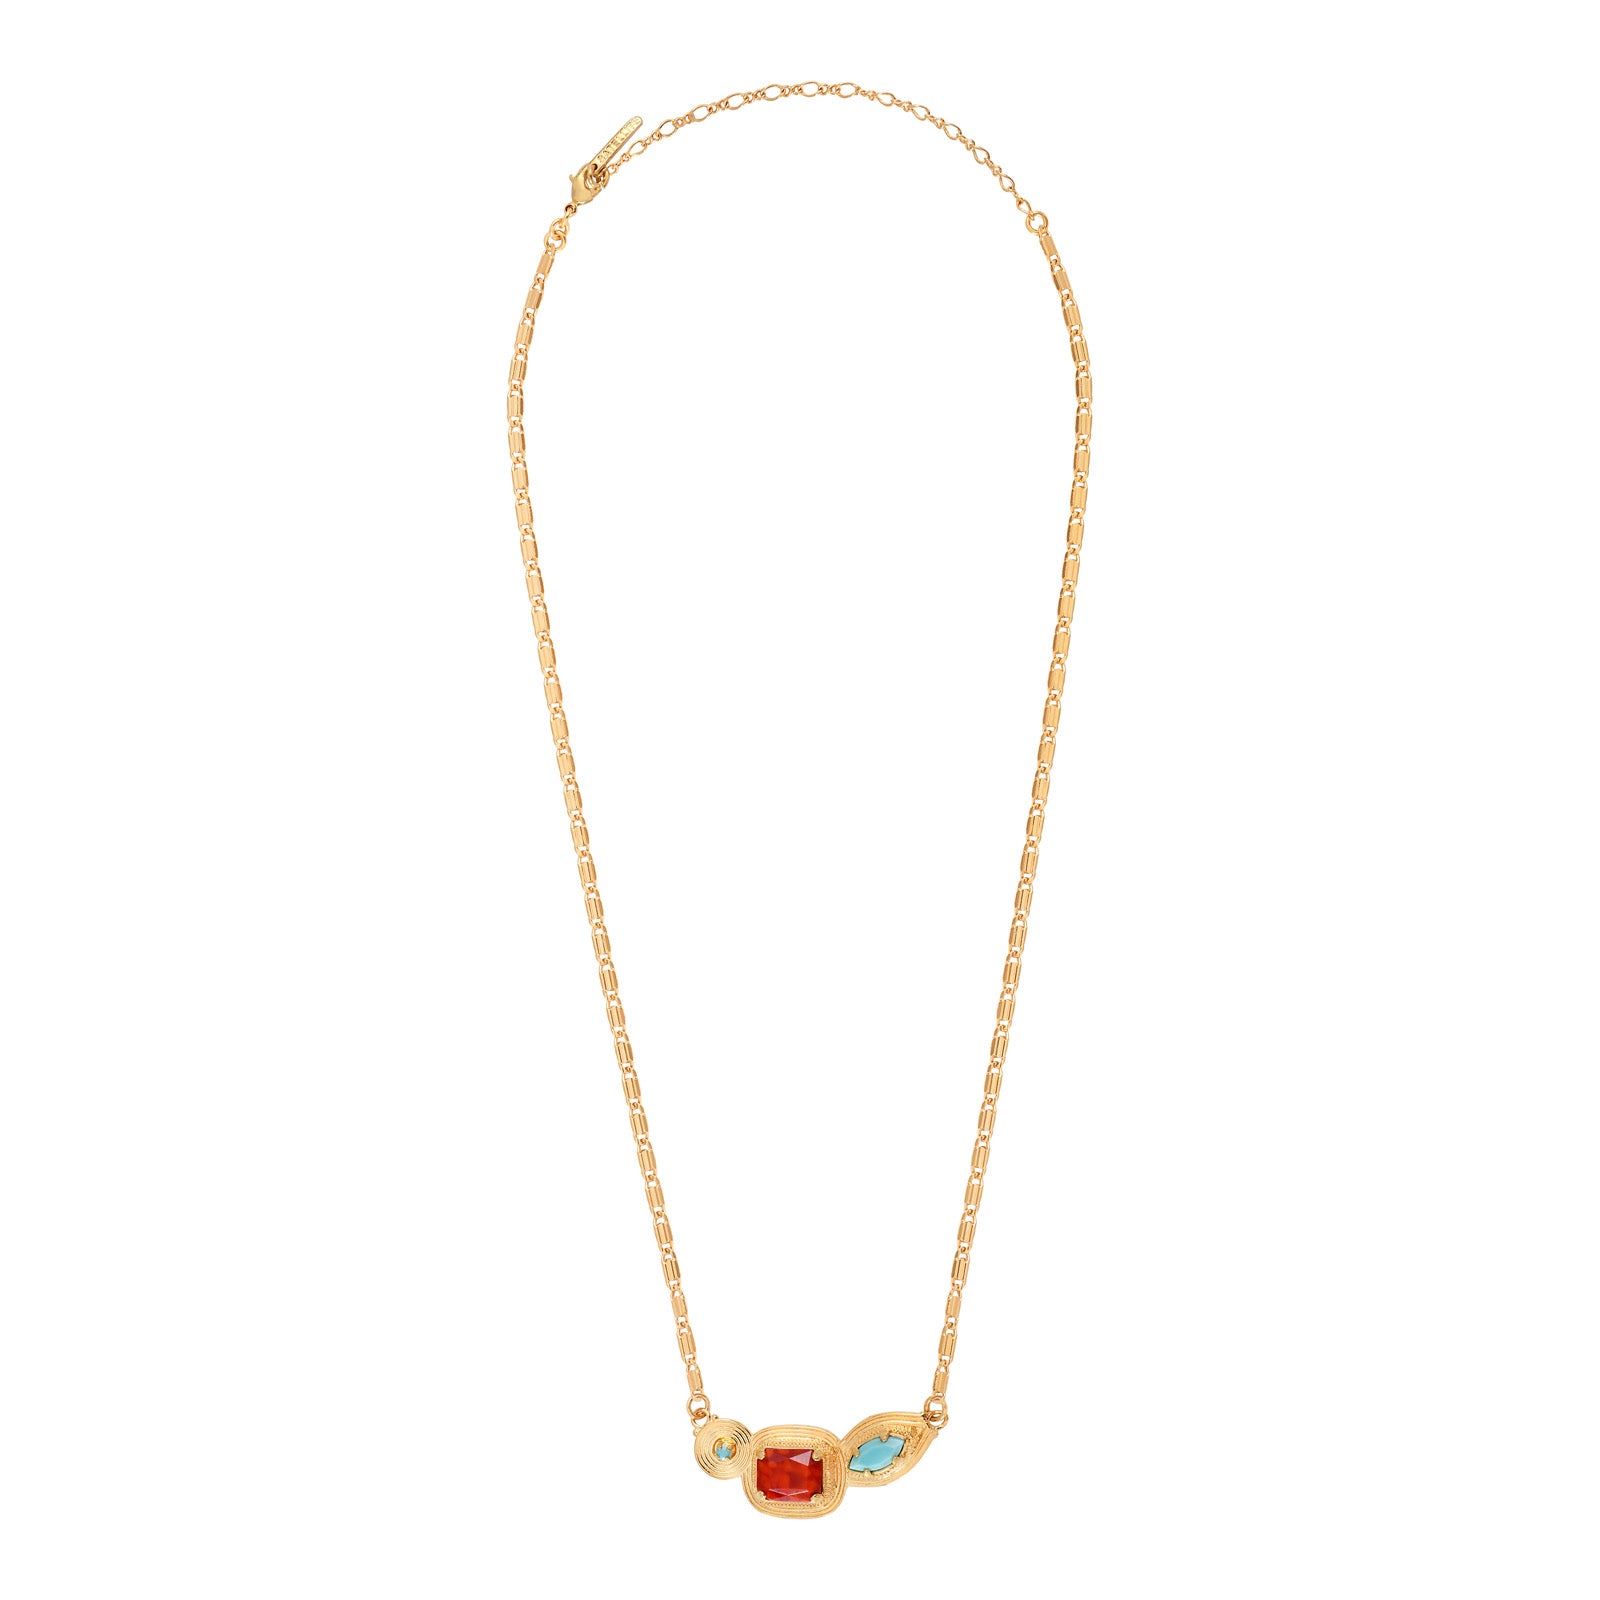 Three shape stone necklace in red